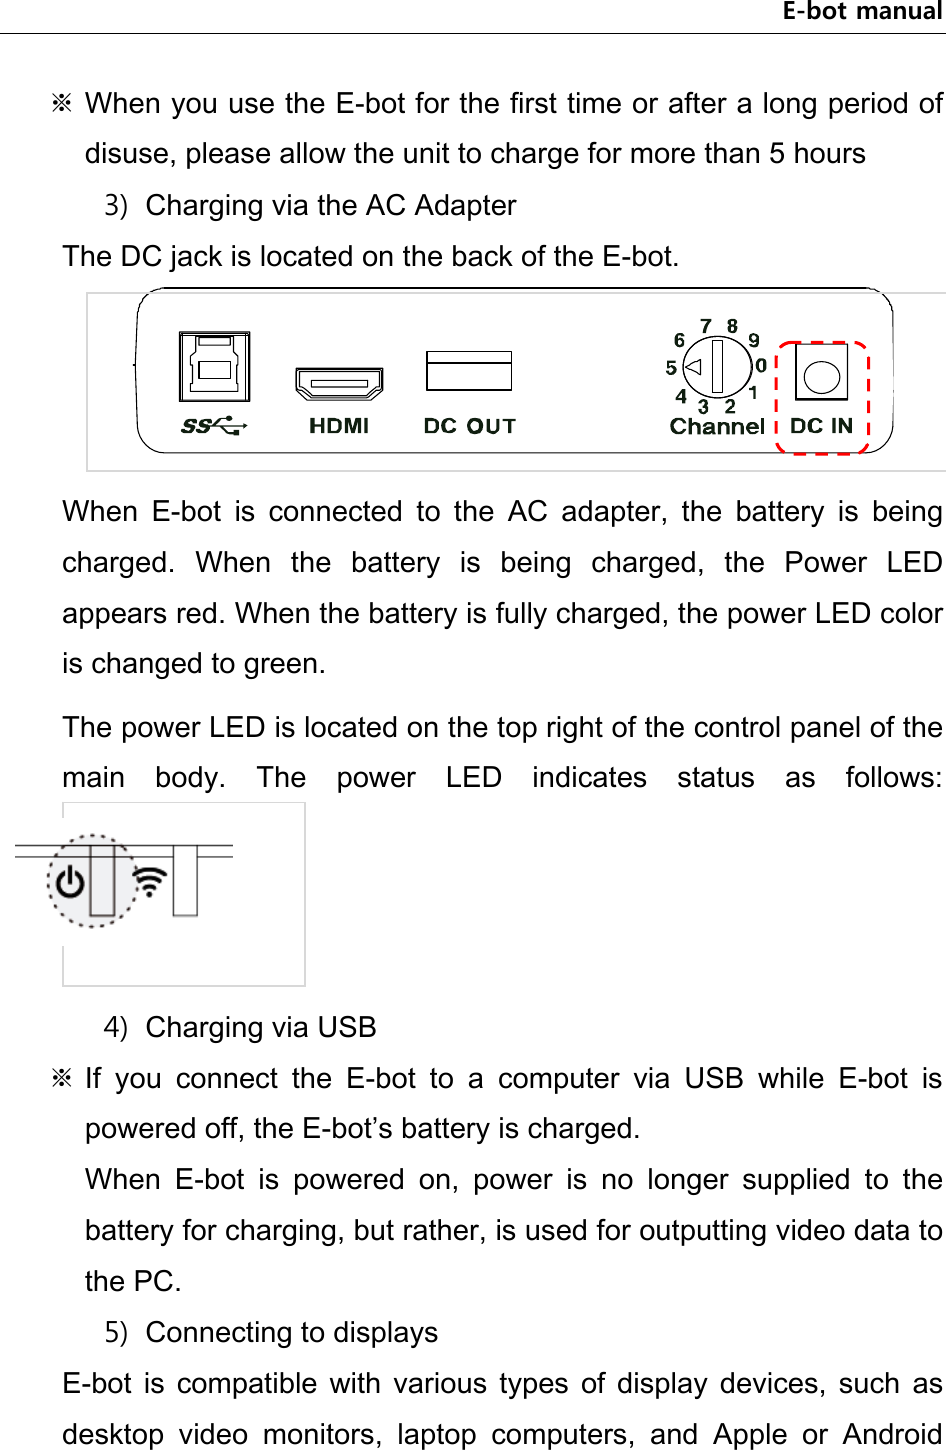 E-bot manual ※ When you use the E-bot for the first time or after a long period of disuse, please allow the unit to charge for more than 5 hours 3) Charging via the AC Adapter The DC jack is located on the back of the E-bot.  When  E-bot  is  connected  to  the  AC  adapter,  the  battery  is  being charged.  When  the  battery  is  being  charged,  the  Power  LED appears red. When the battery is fully charged, the power LED color is changed to green. The power LED is located on the top right of the control panel of the main  body.  The  power  LED  indicates  status  as  follows:  4) Charging via USB ※ If  you  connect  the  E-bot  to  a  computer  via  USB  while  E-bot  is powered off, the E-bot’s battery is charged. When  E-bot  is  powered  on,  power  is  no  longer  supplied  to  the battery for charging, but rather, is used for outputting video data to the PC. 5) Connecting to displays E-bot  is  compatible  with  various  types  of  display  devices,  such as desktop  video  monitors,  laptop  computers,  and  Apple  or  Android 